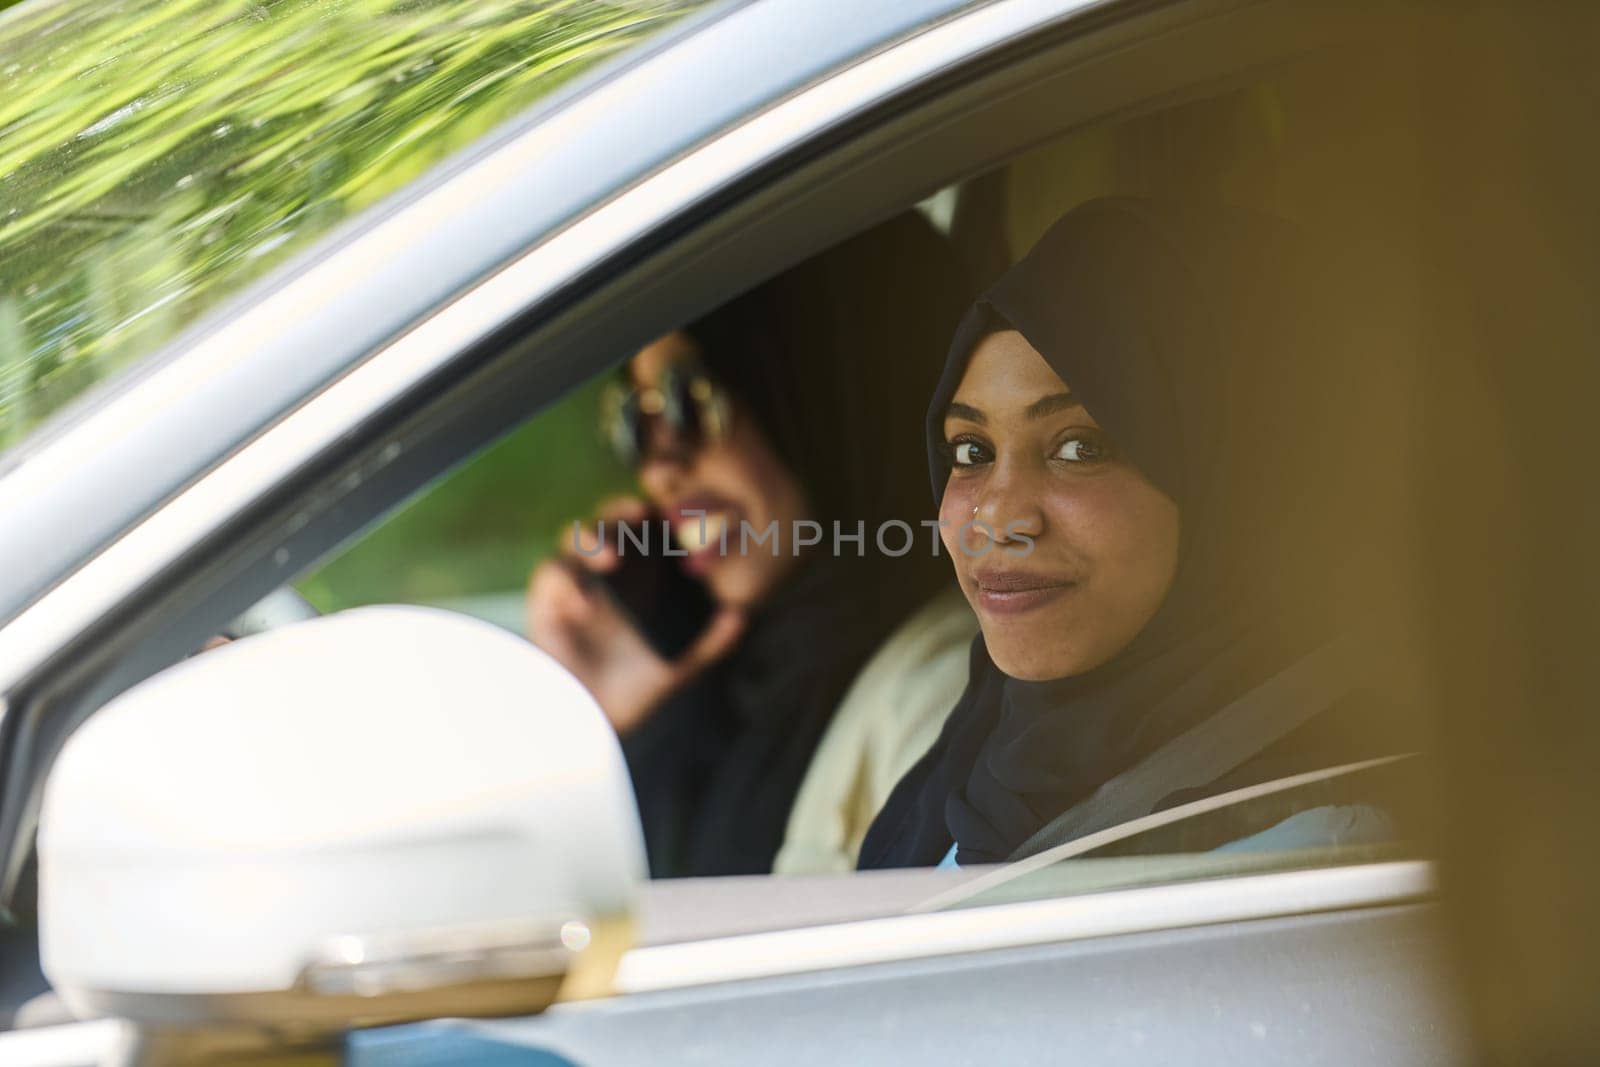 Two Muslim women wearing hijab converse on a smartphone while traveling together in a car through the.